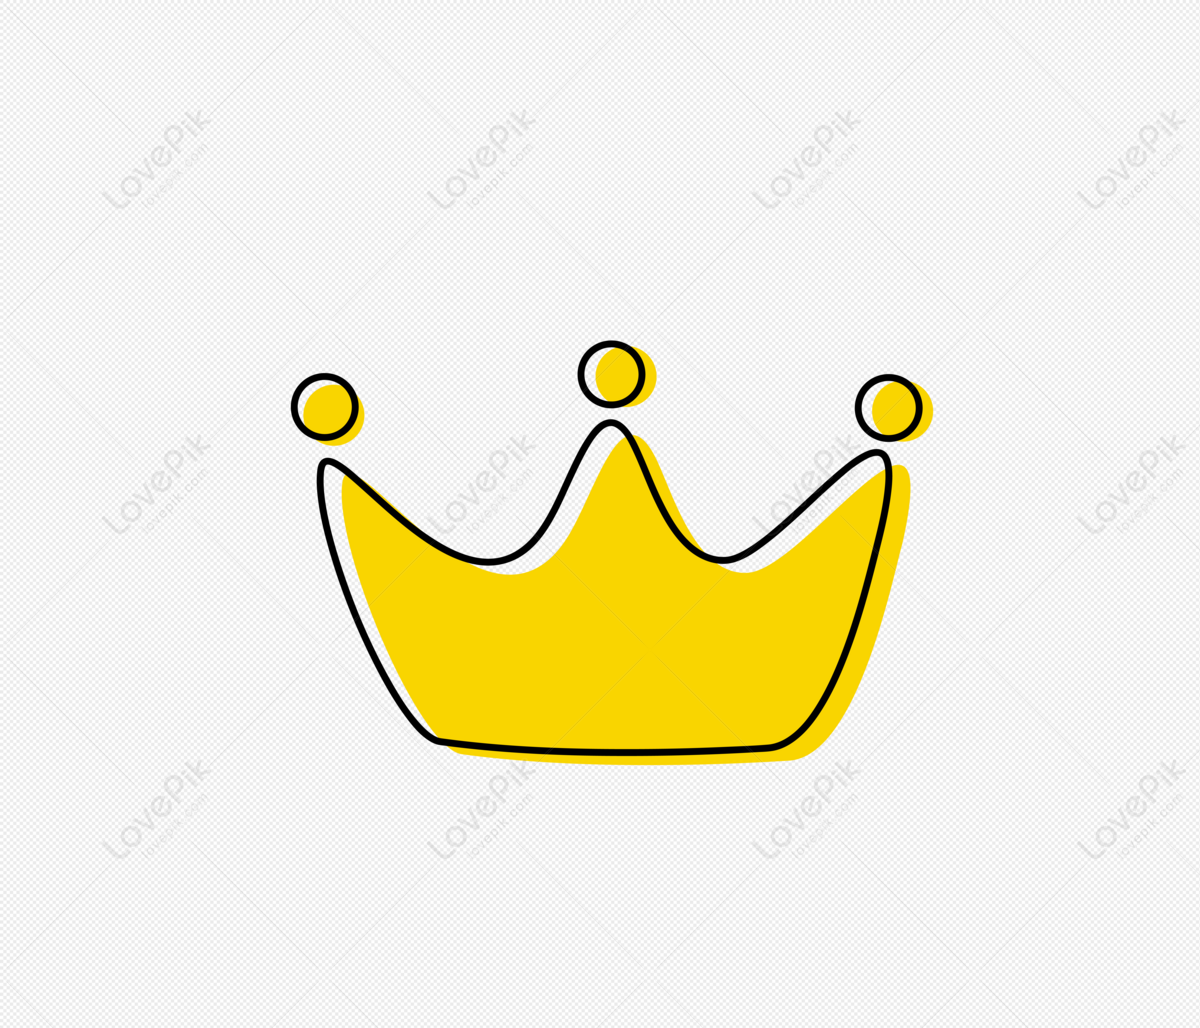 Cartoon Crown PNG Picture And Clipart Image For Free Download - Lovepik |  401367525